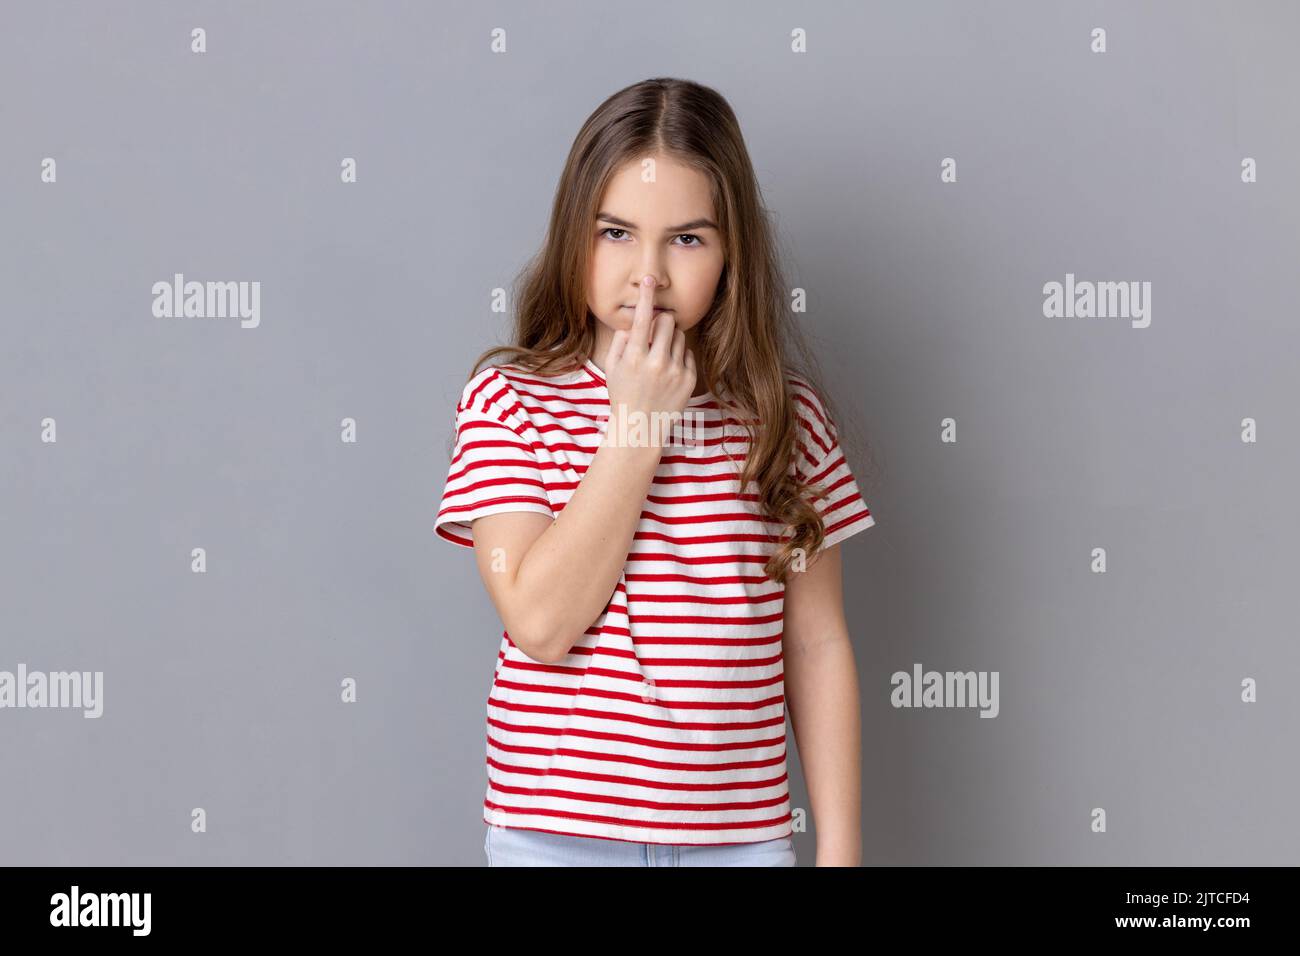 Don't lie. Little girl wearing striped T-shirt looking with incredulous suspicious gaze and touching nose, gesturing you are liar, suspecting falsehood. Indoor studio shot isolated on gray background. Stock Photo